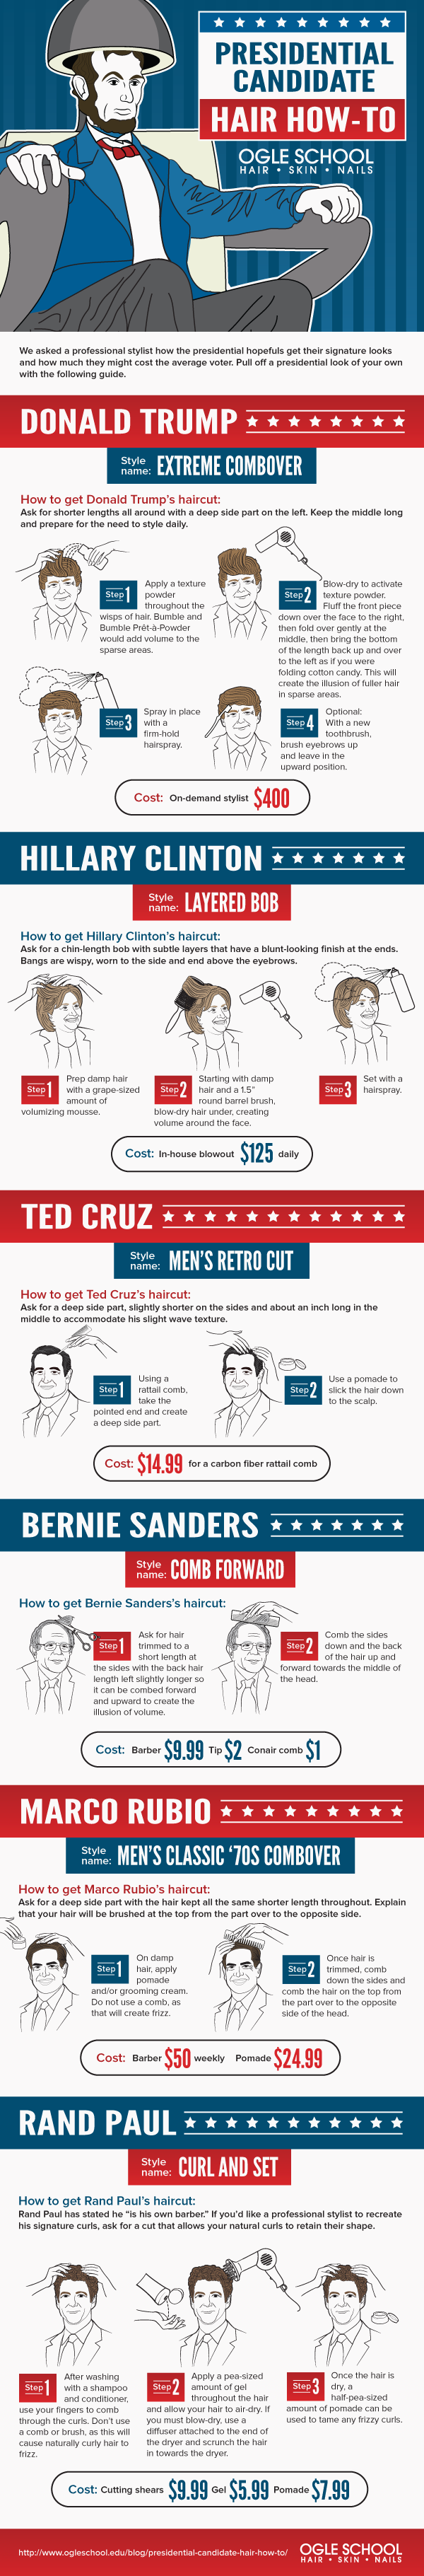 Presidential Candidate Hair How-To_IG-2D